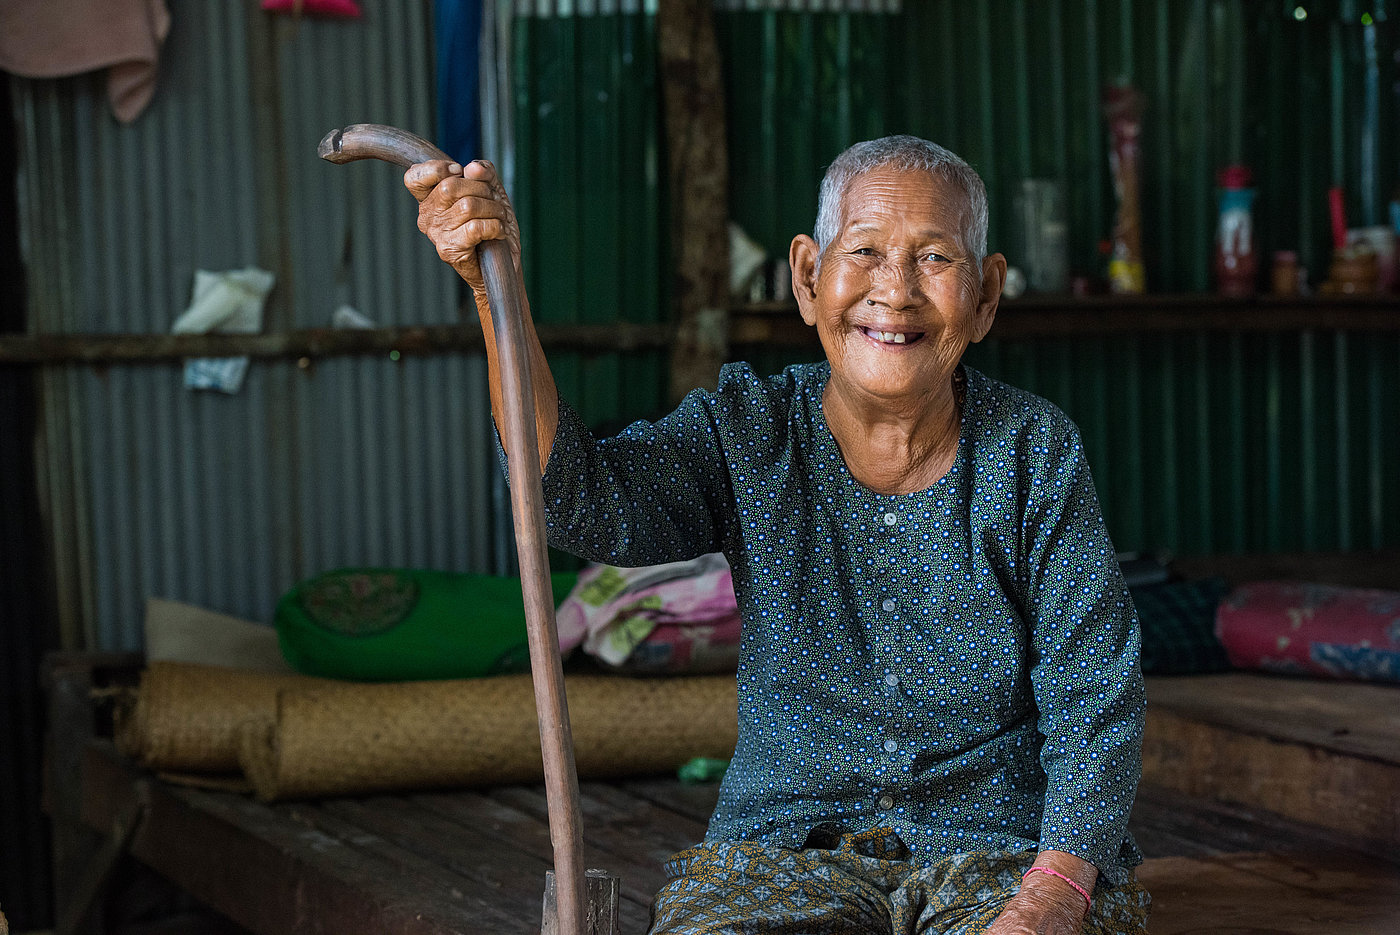 Photo: An elderly woman sits and smiles at the camera. In her right hand she is holding a long stick.